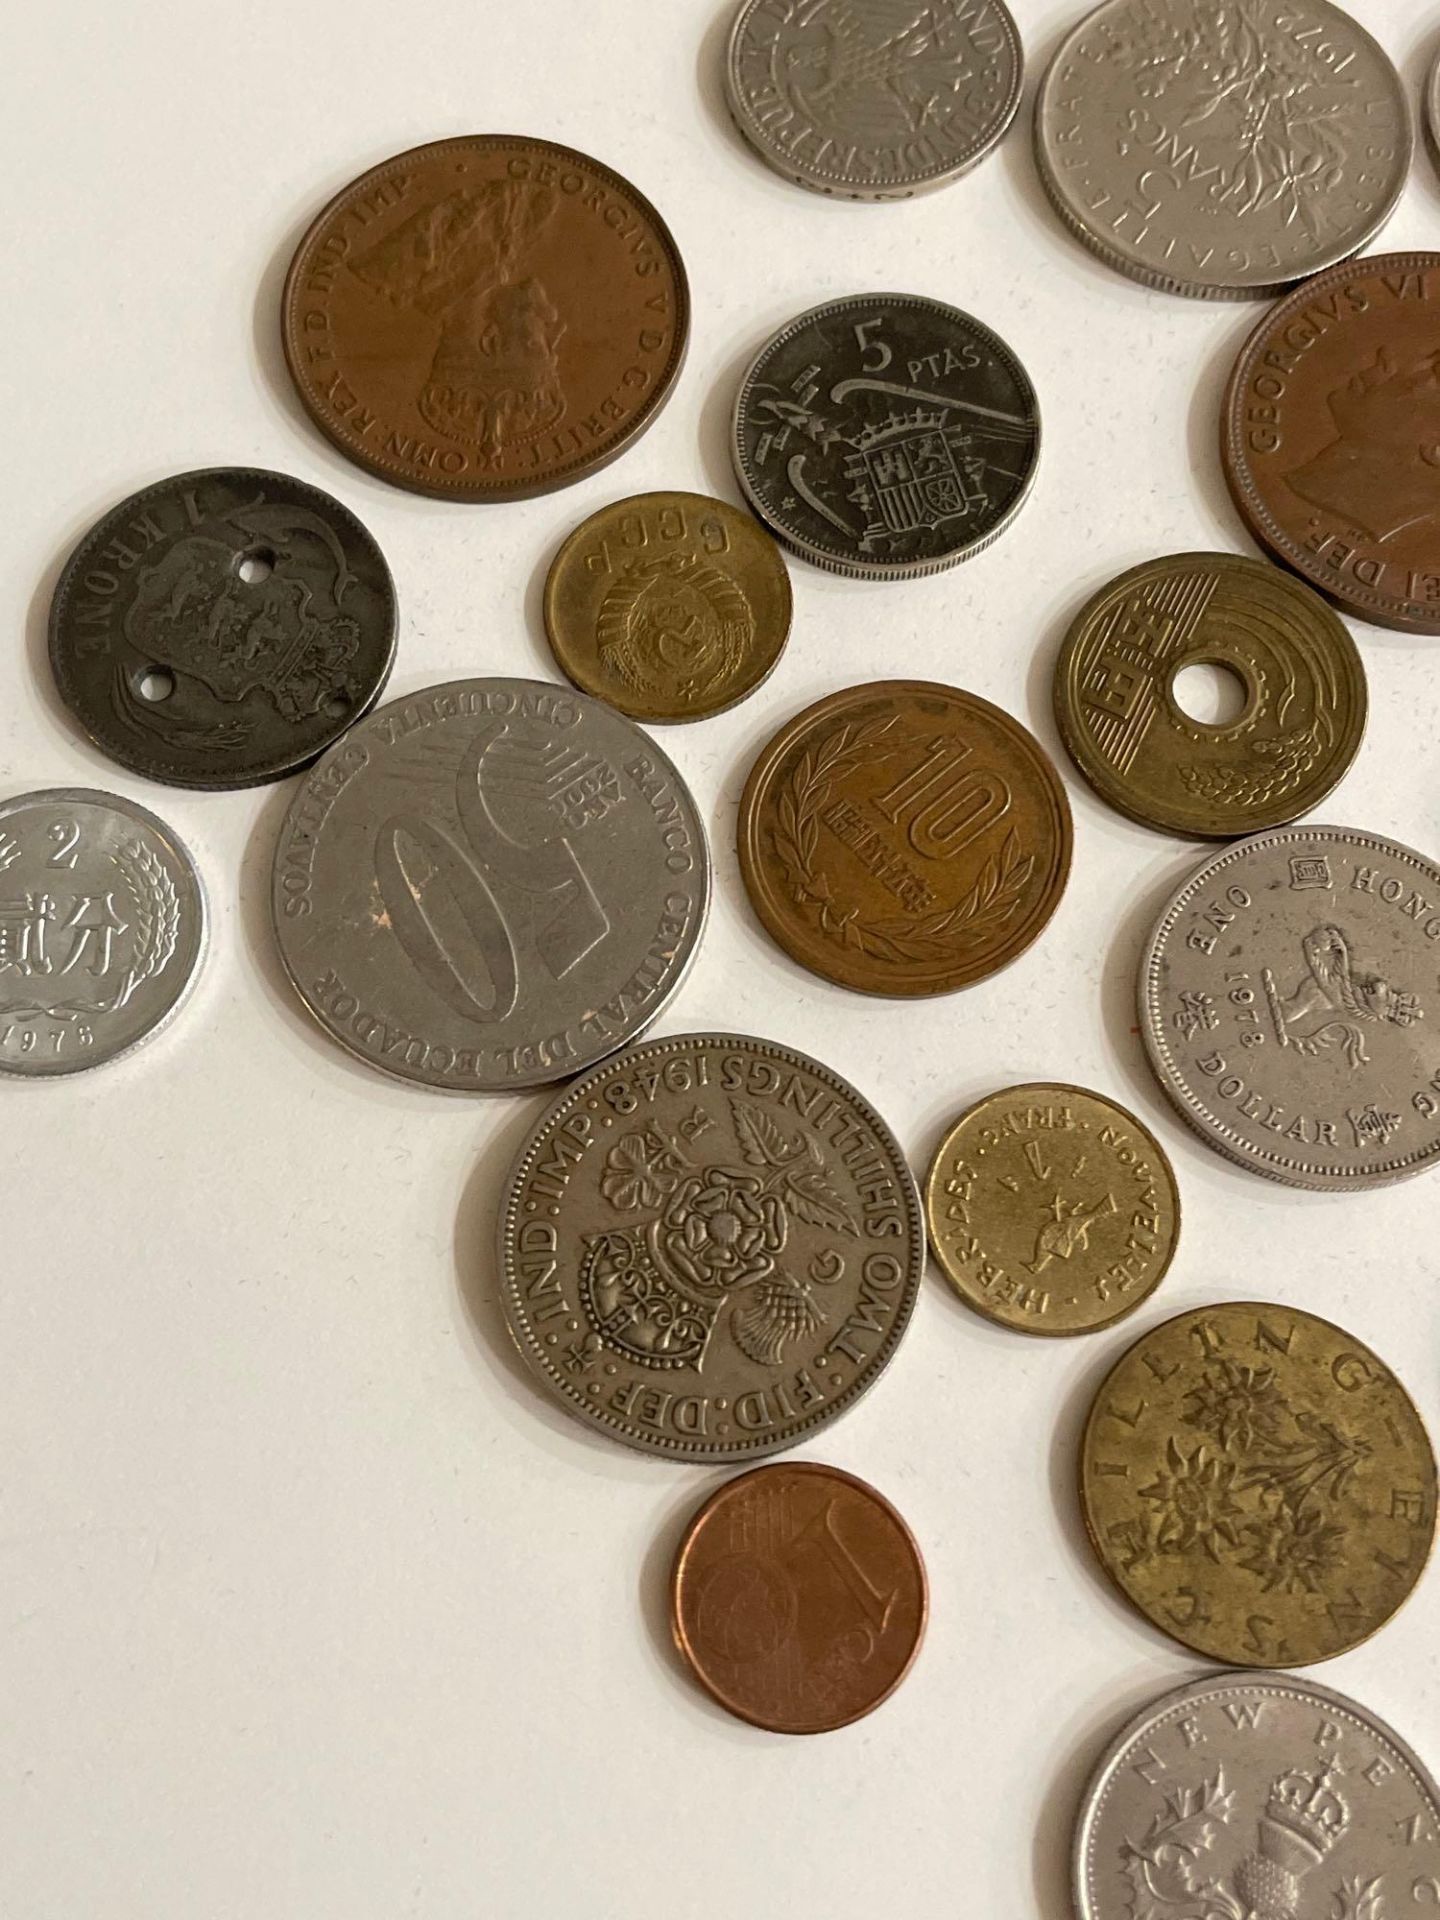 Foreign Coins - Image 10 of 11